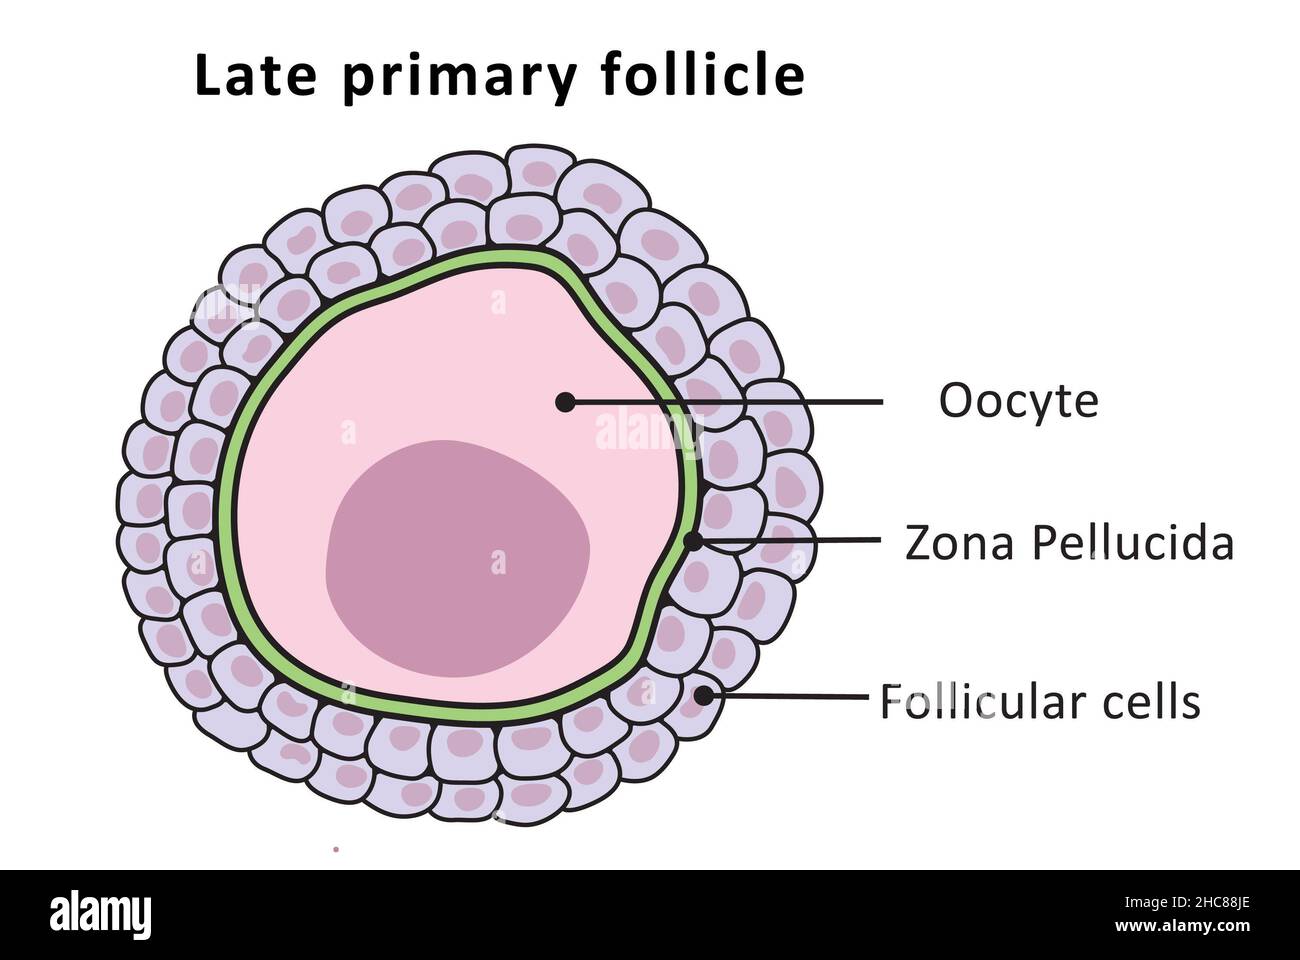 Late primary follicle, menstrual cycle, ovulation (unlabeled) Stock Photo